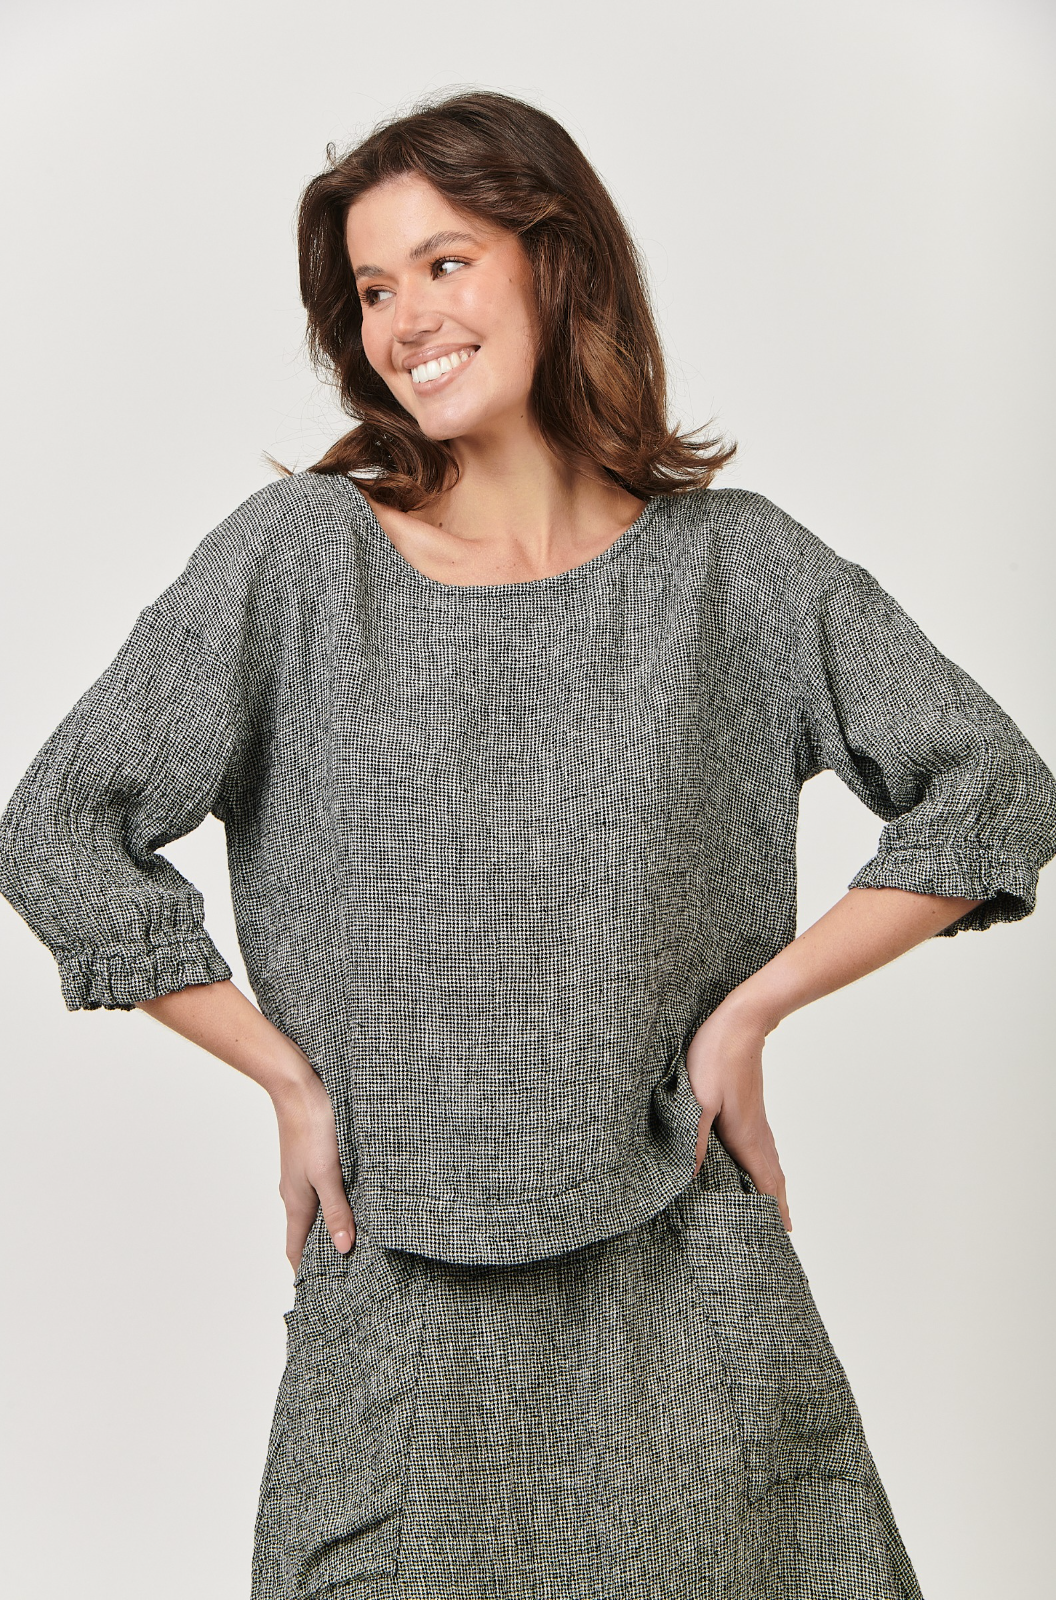 Naturals by O & J Button Back Top in Black Puppytooth